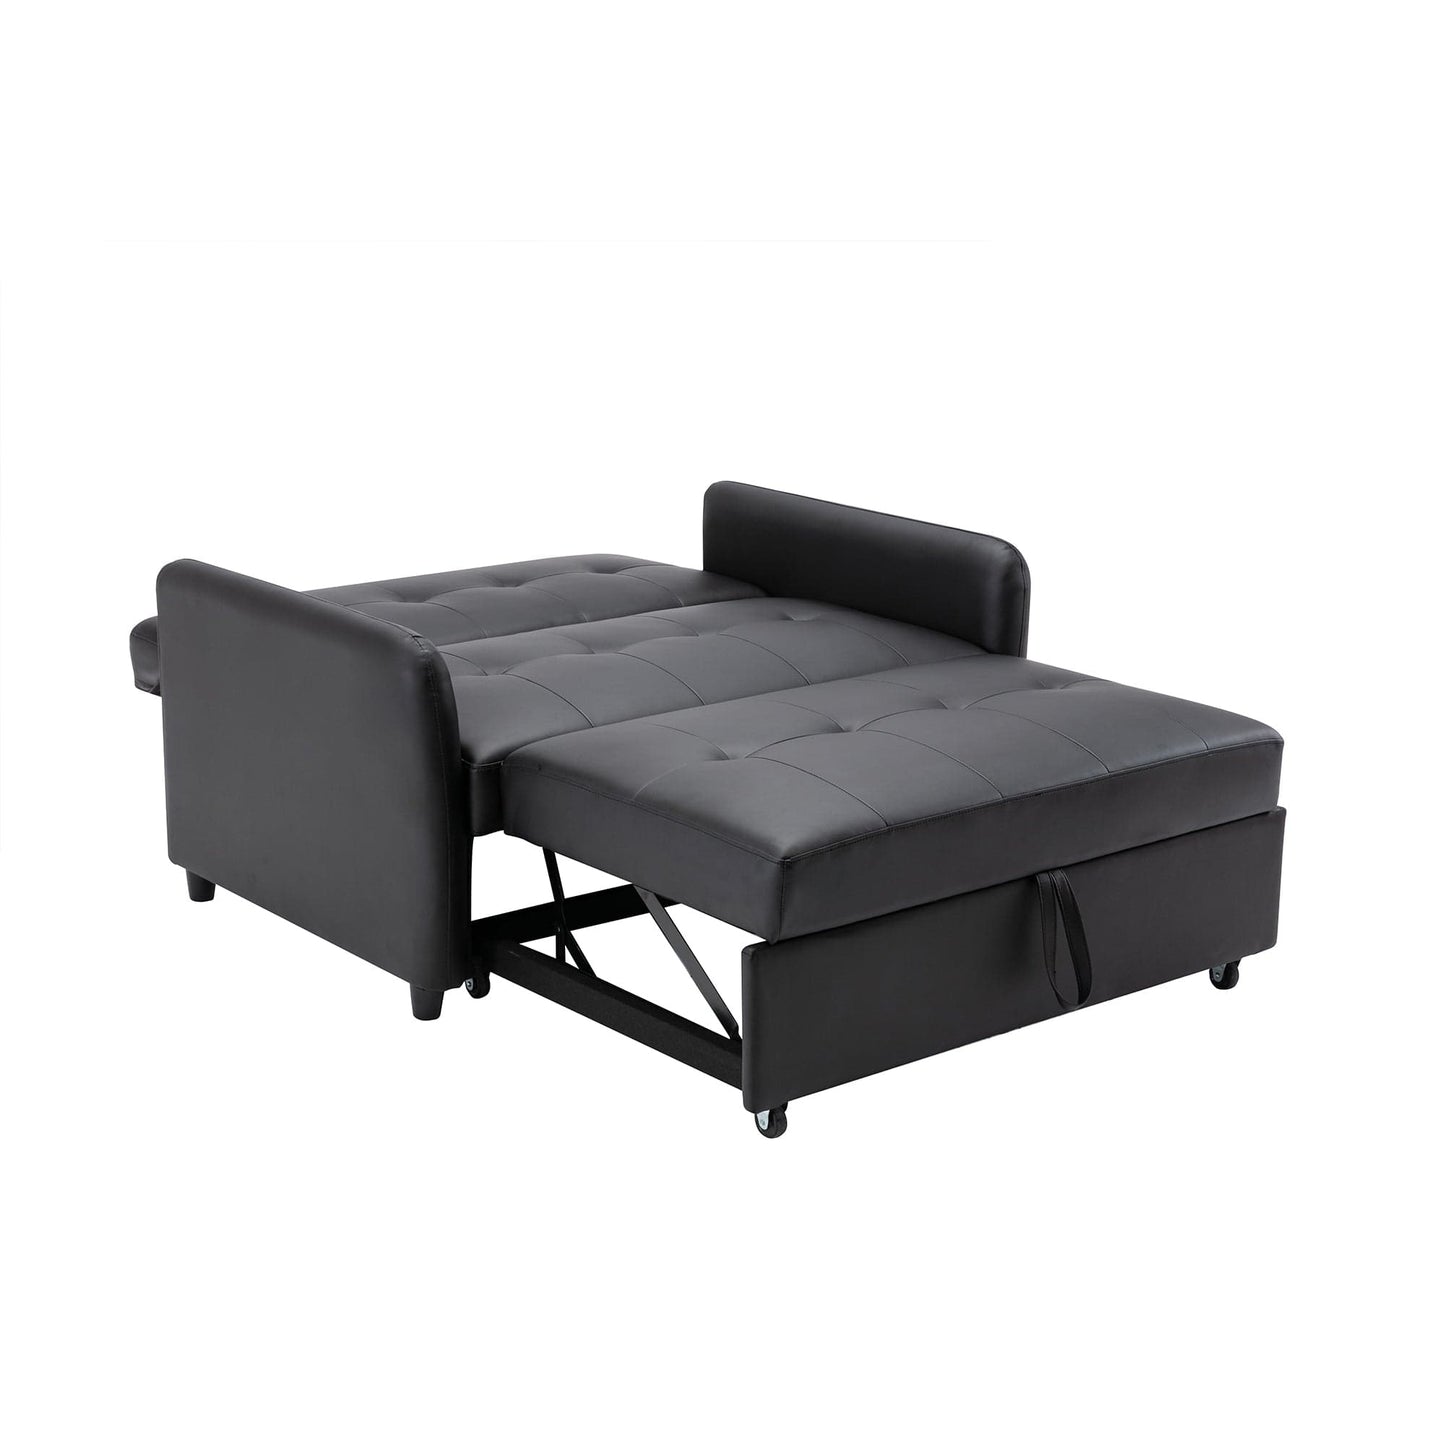 Orisfur. 51" Convertible Sleeper Bed, Adjustable Oversized Armchair  with Dual USB Ports for Small Space